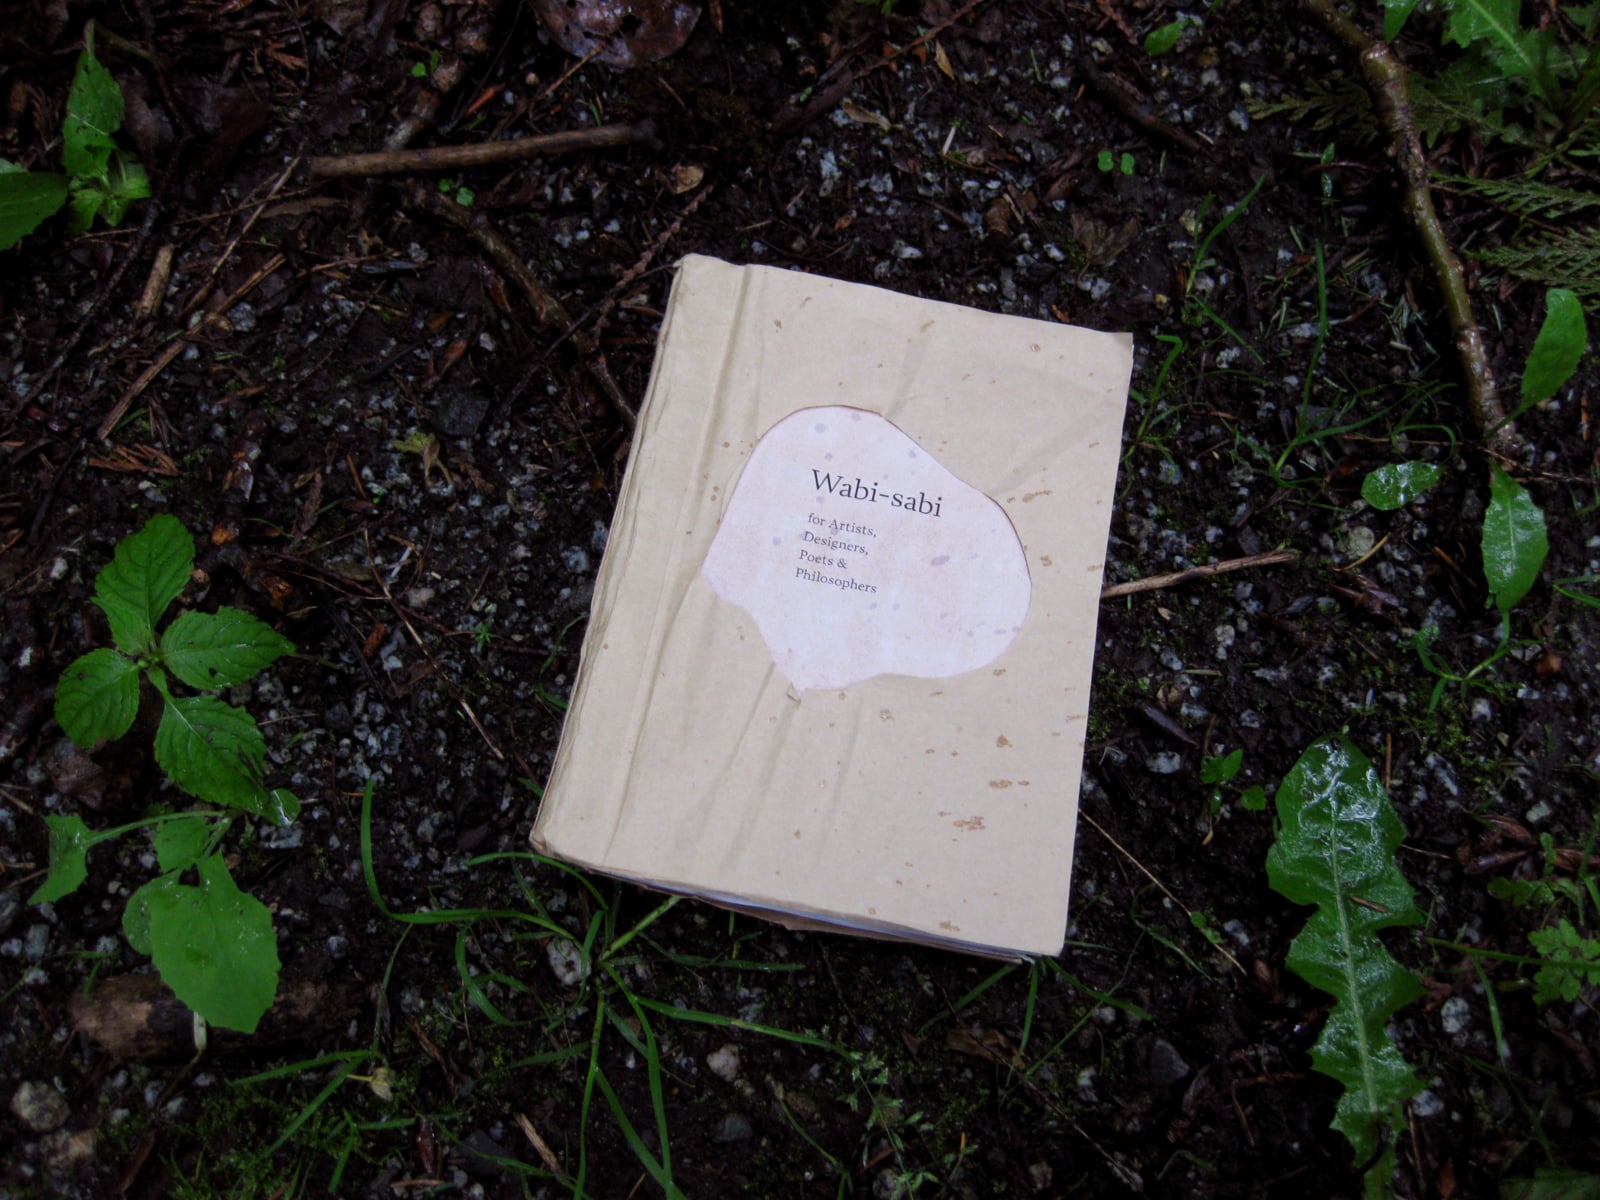 a book on a wet forest floor. Pages are closed. Title reads: Wabi-sabi for artists, designers, poets and philosophers.